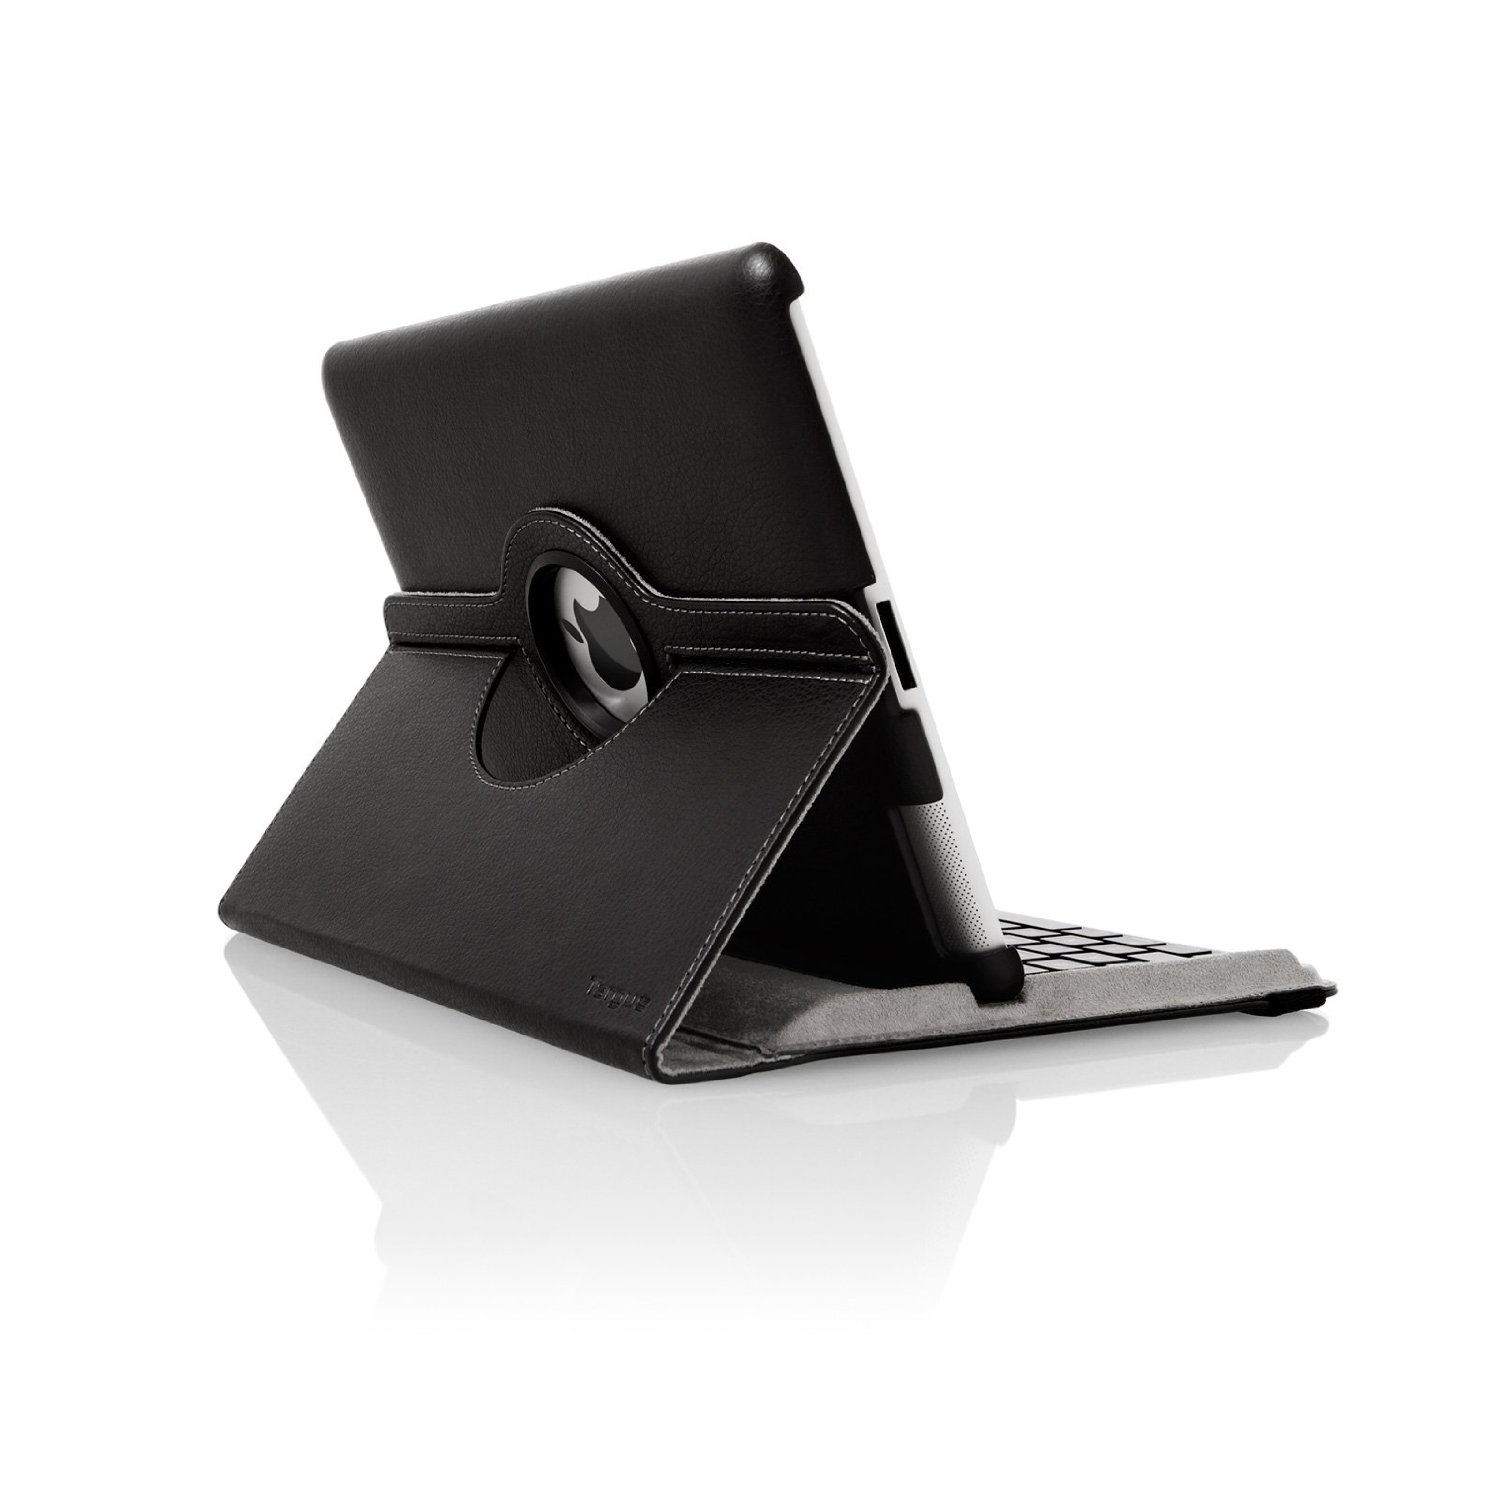 http://thetechjournal.com/wp-content/uploads/images/1108/1312709193-targus-versavu-case-and-keyboard-for-ipad-2-5.jpg